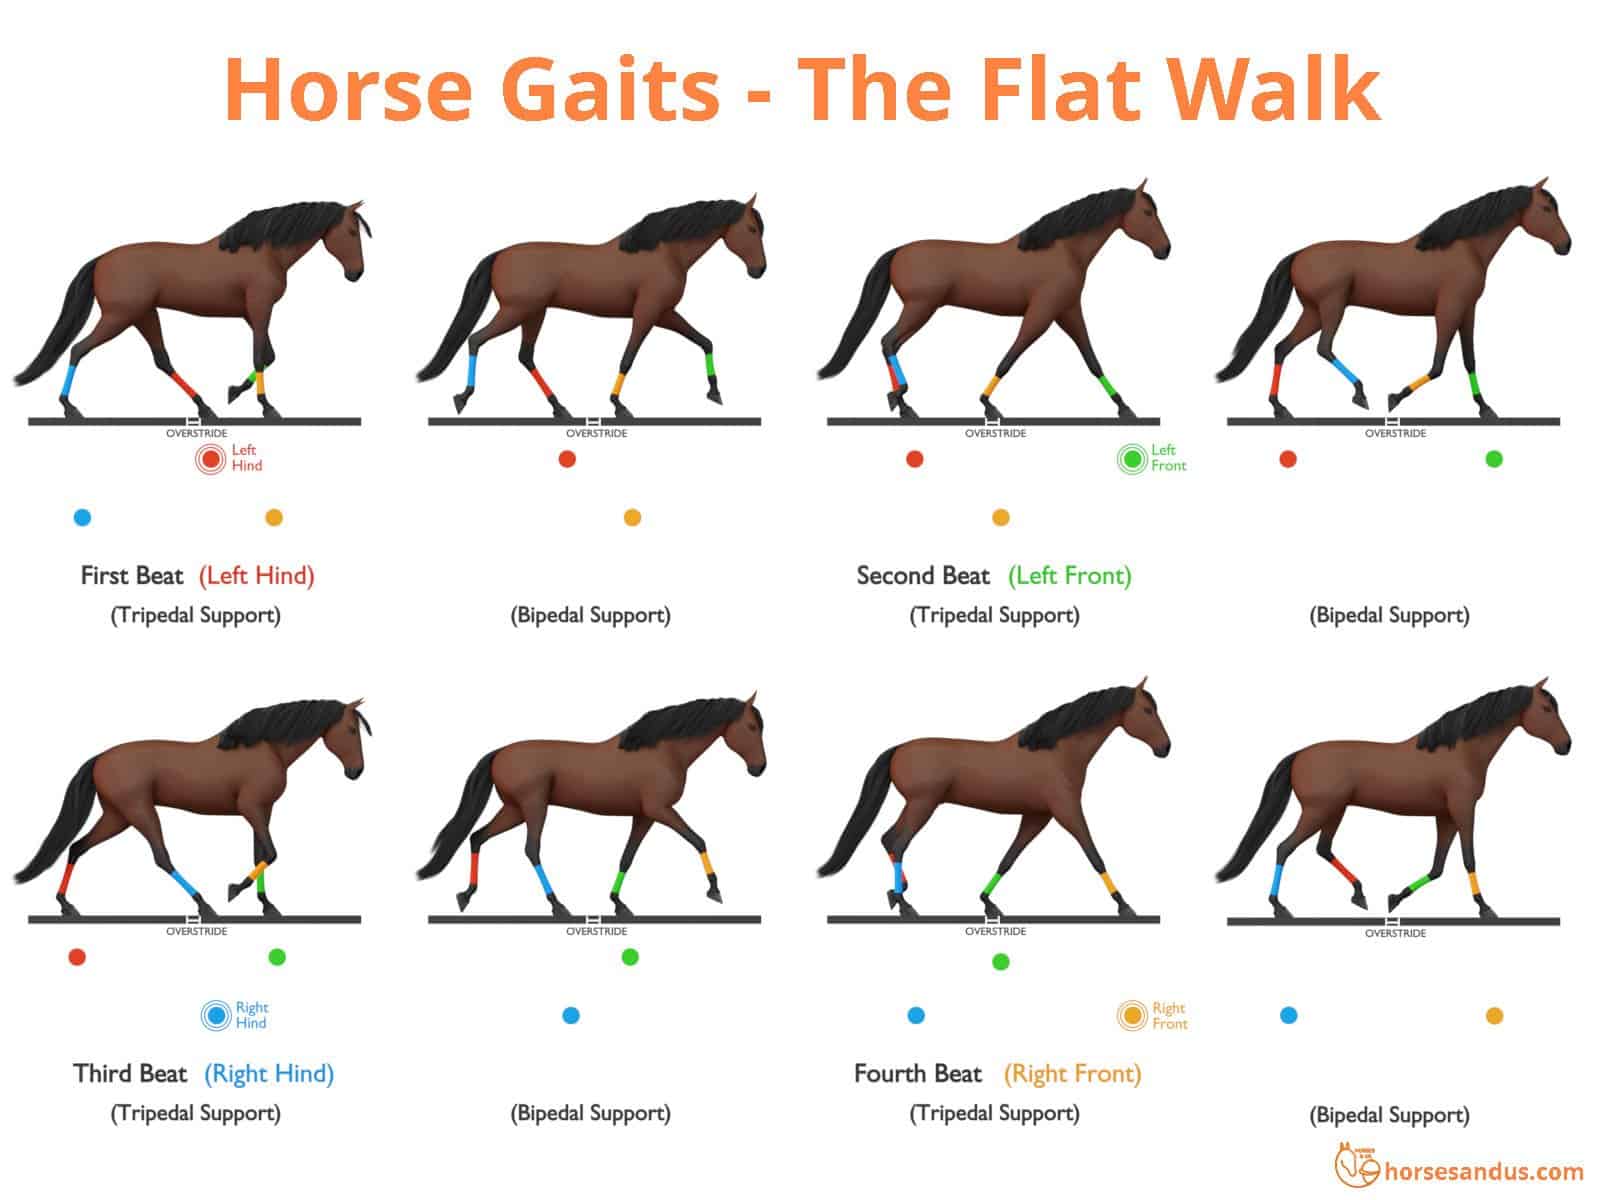 Sequence of footfalls for the Flat Foot Walk - Tennessee Walking Horse